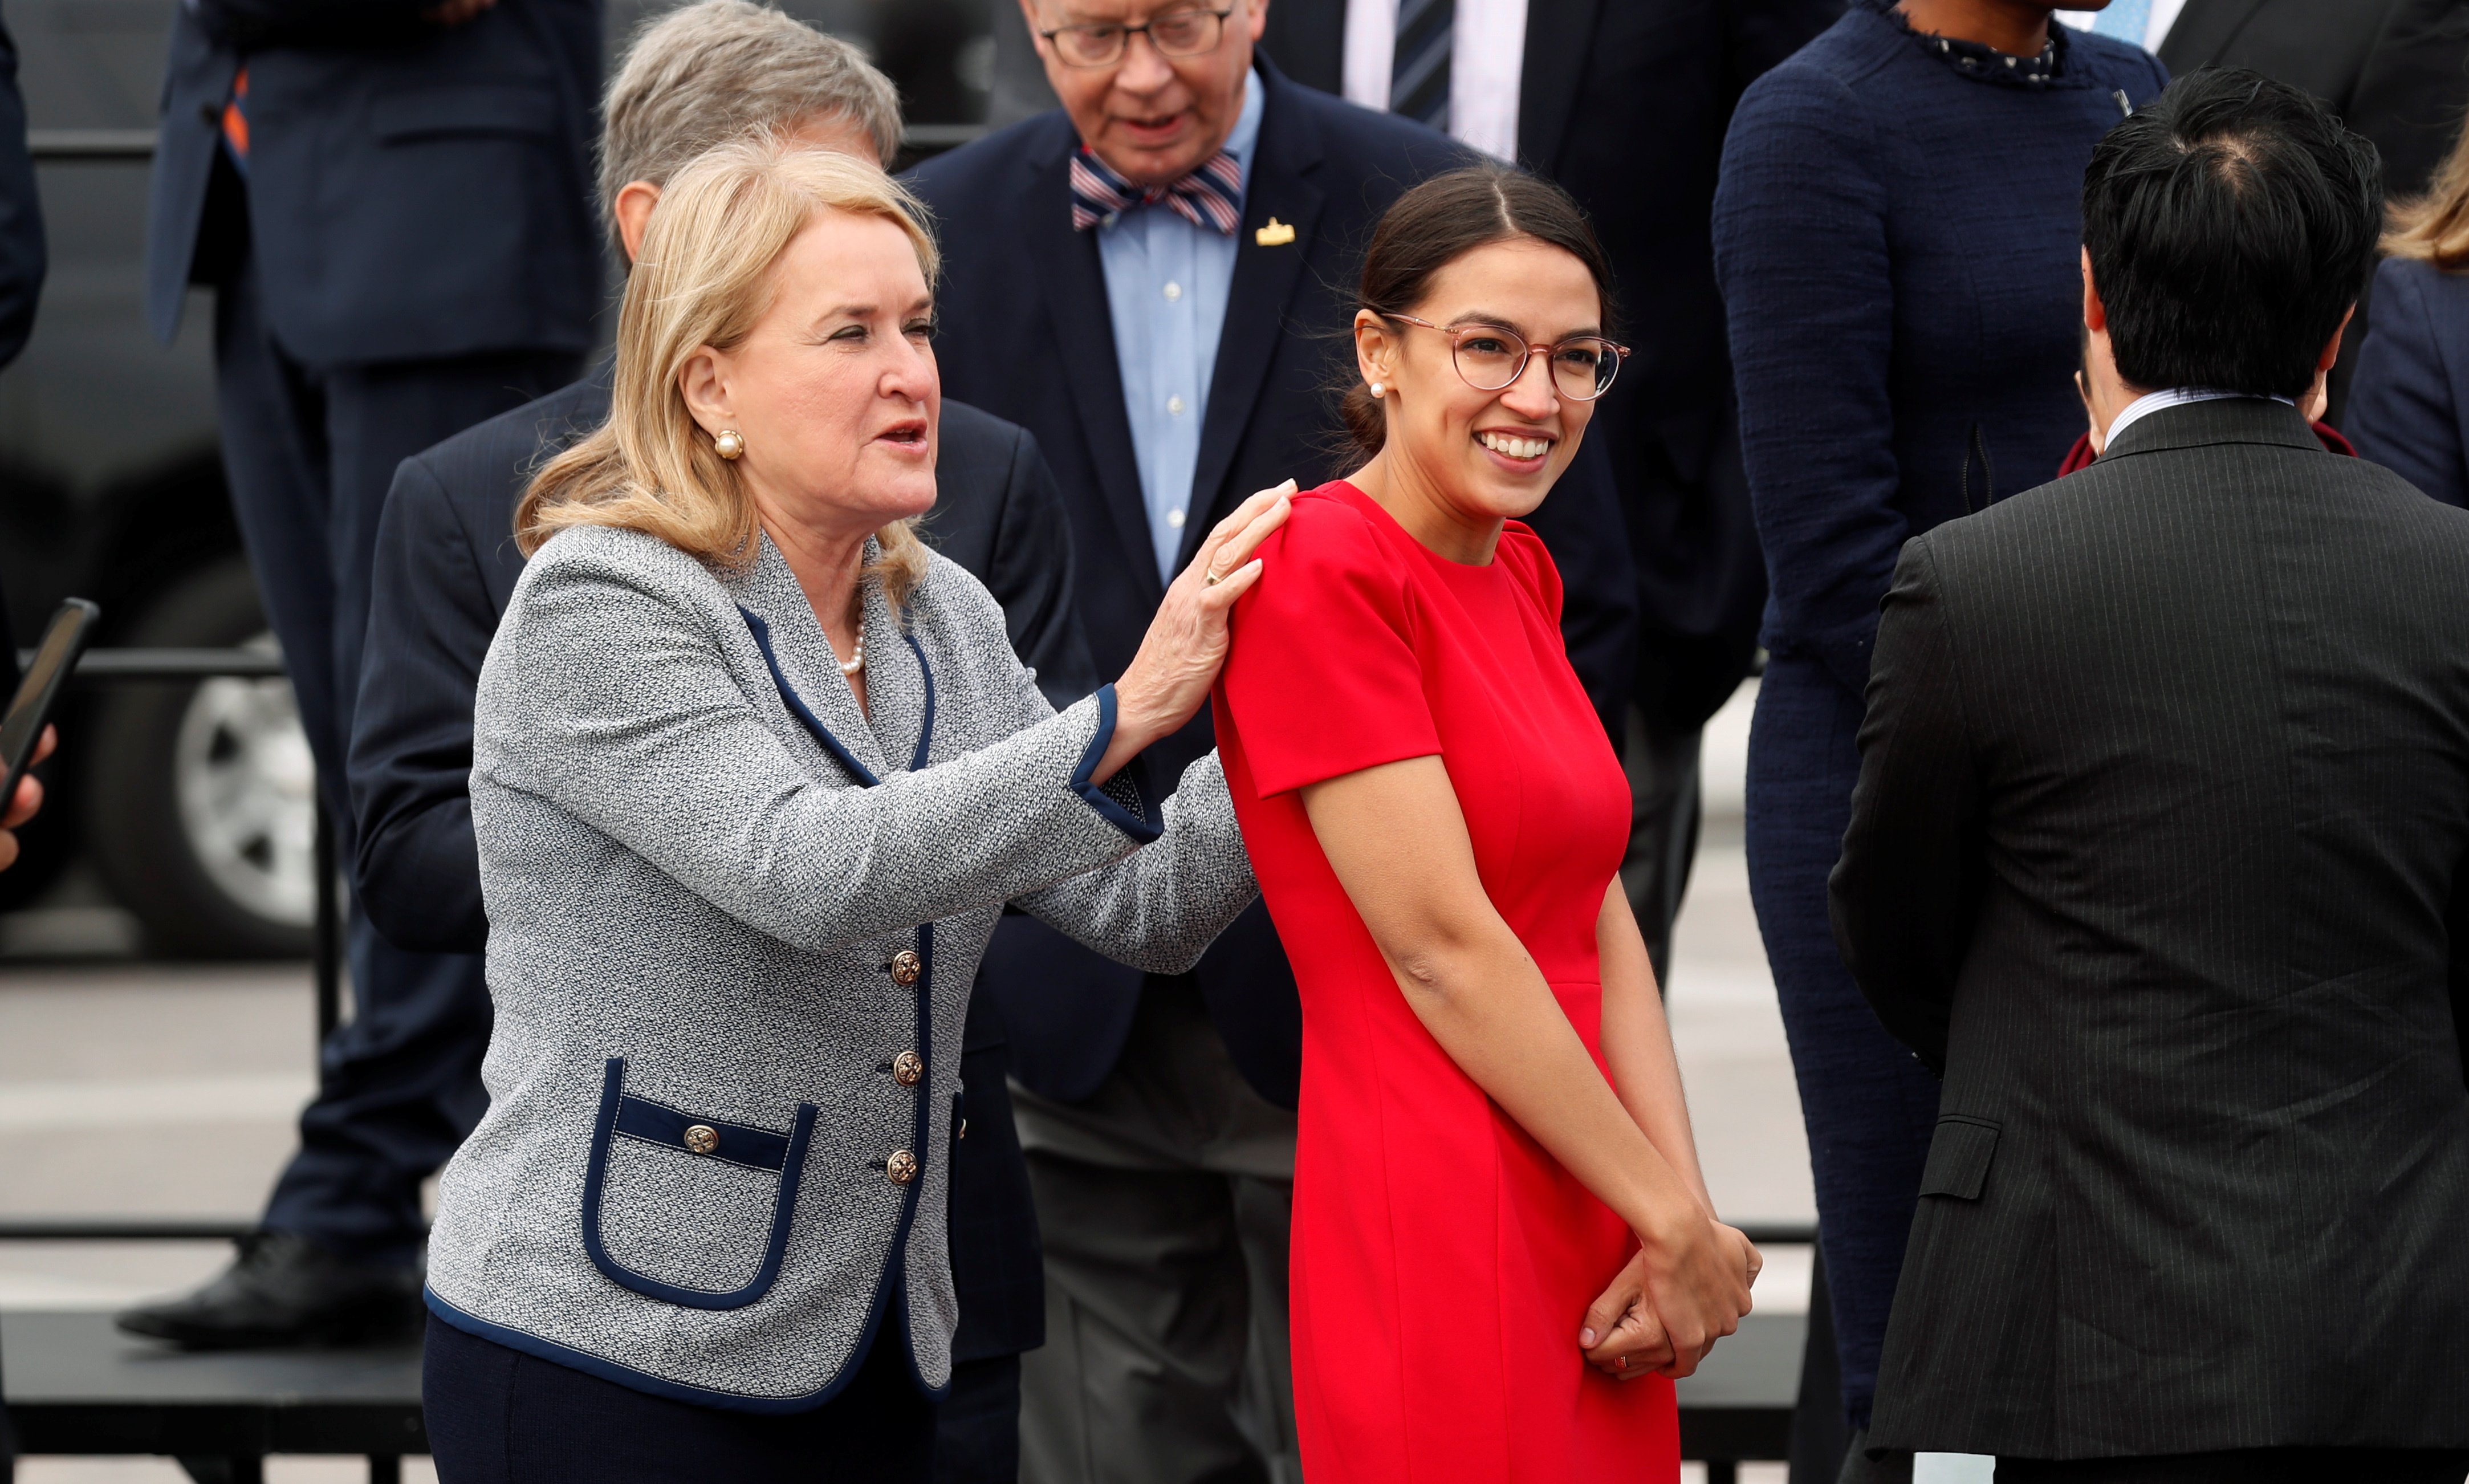 Democratic Representative-elect Wild puts hands on Ocasio-Cortez shoulders as they arrive for class photo for new members of the House on Capitol Hill in Washington